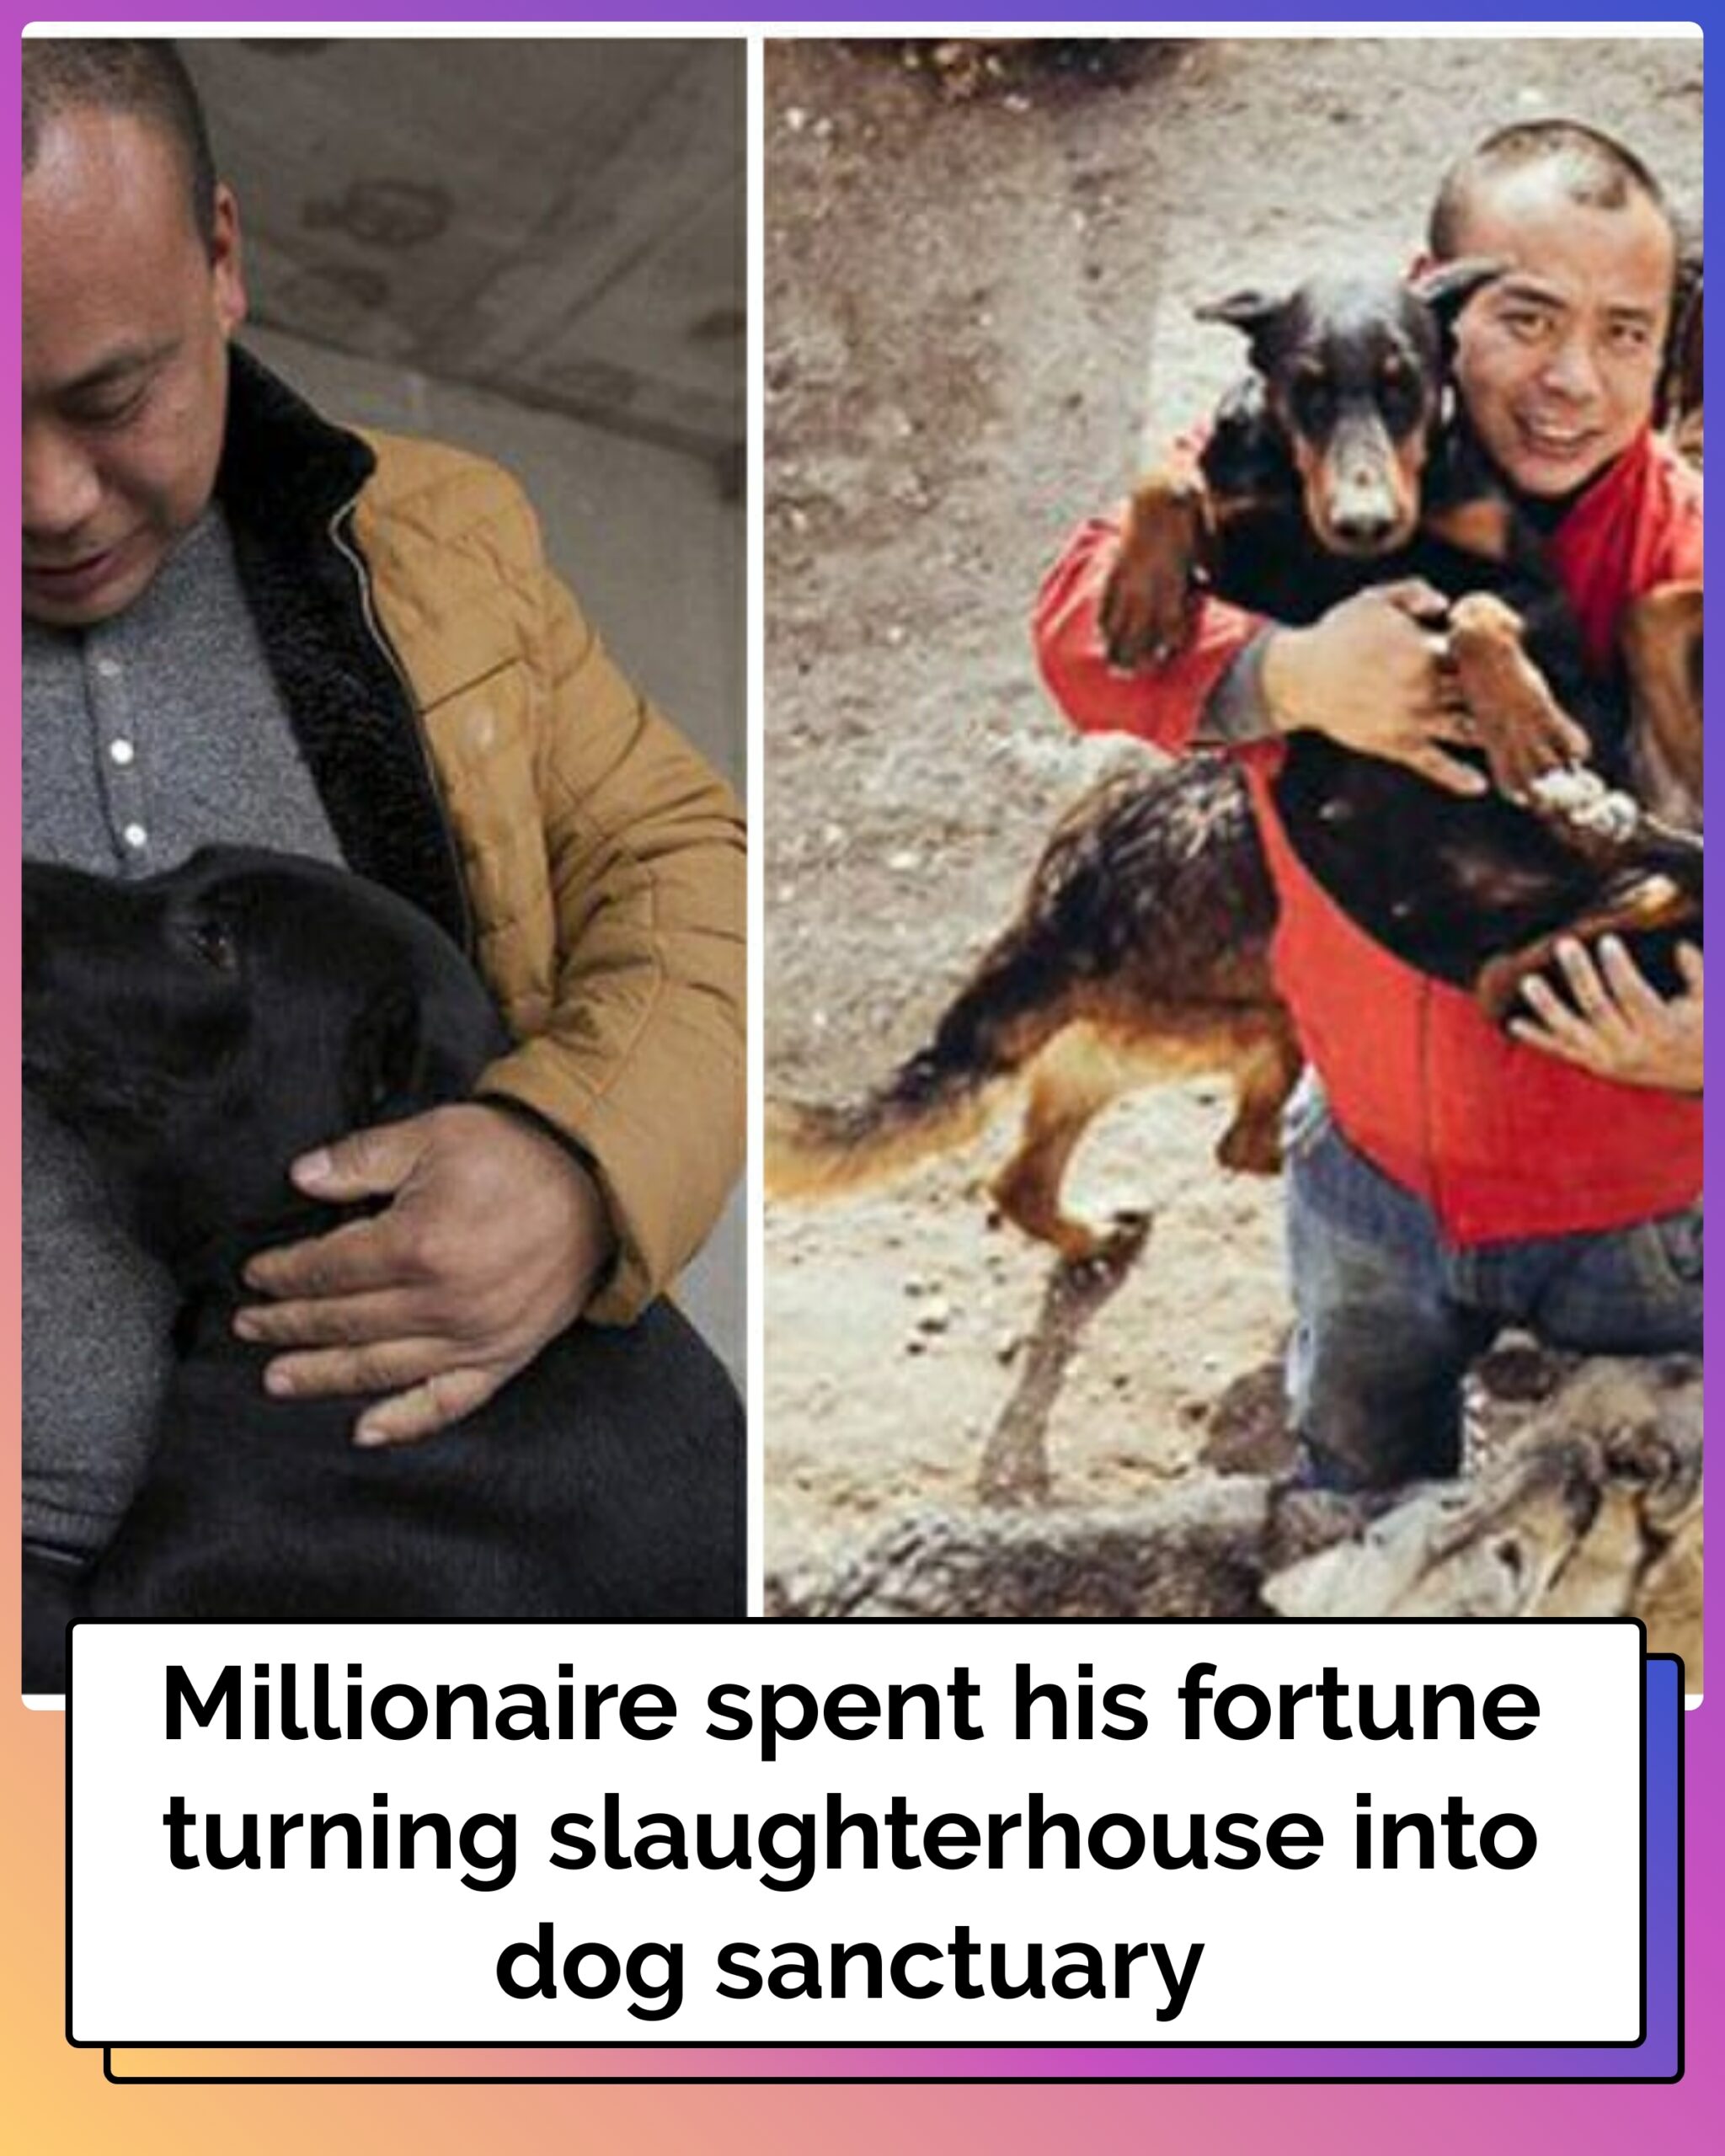 Millionaire Spends Fortune Turning Slaughterhouse into Dog Sanctuary